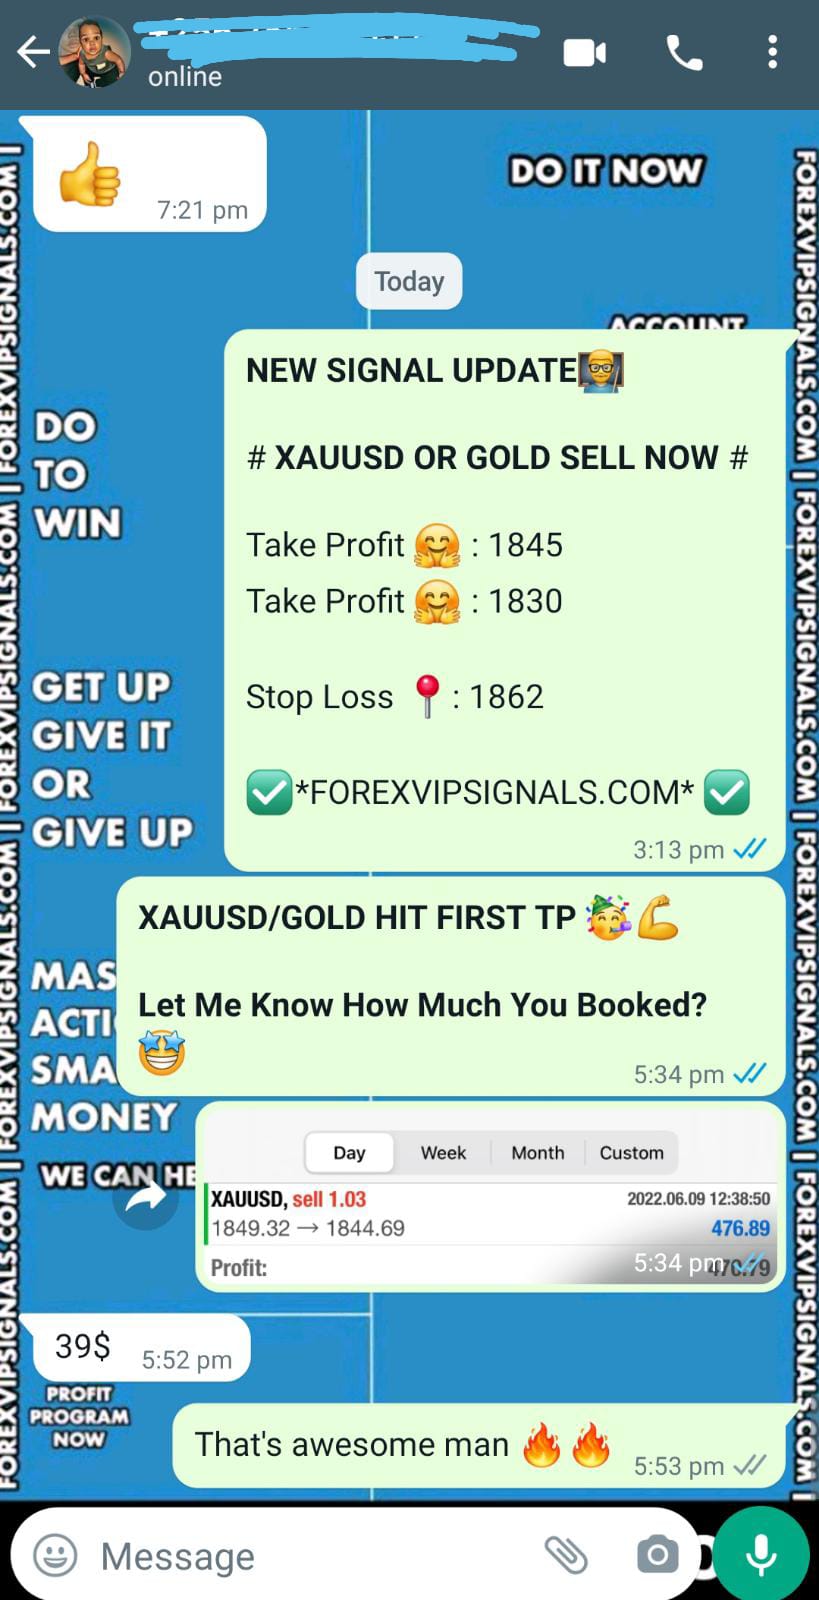 xauusd trading signals with forex vip signals